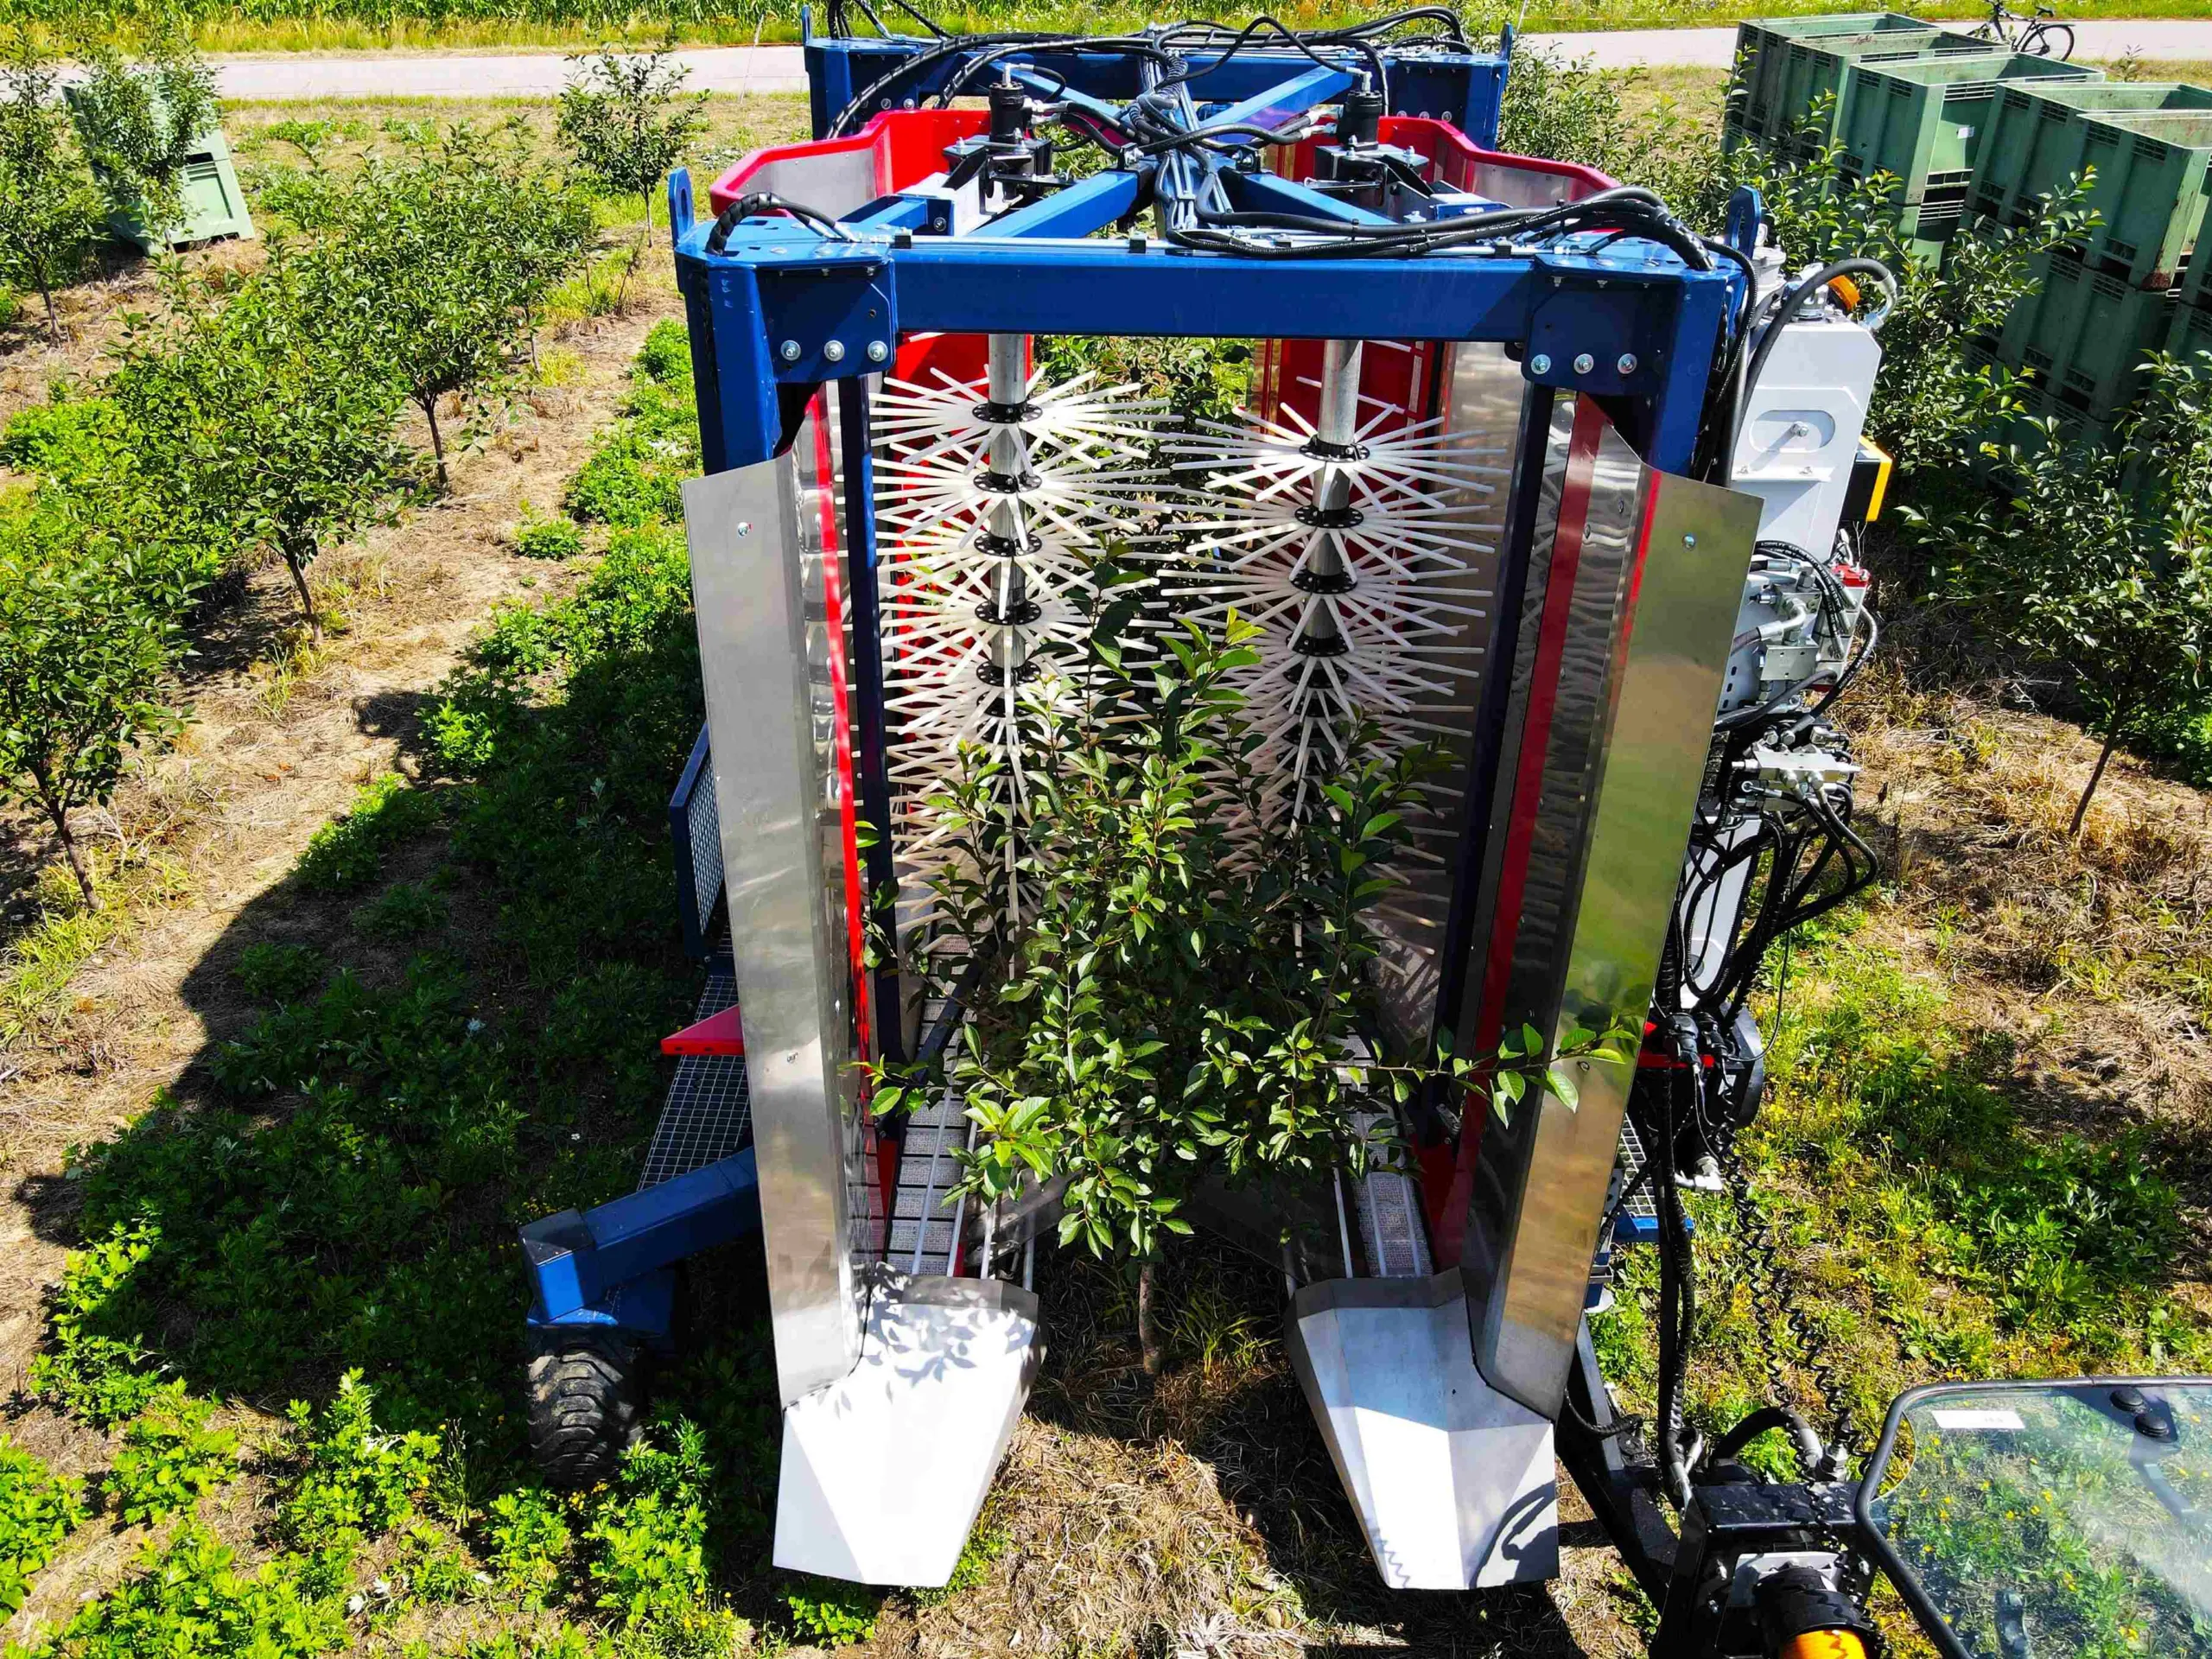 JAGODA 300 trailed cherry harvester efficiently harvesting cherries in an orchard.